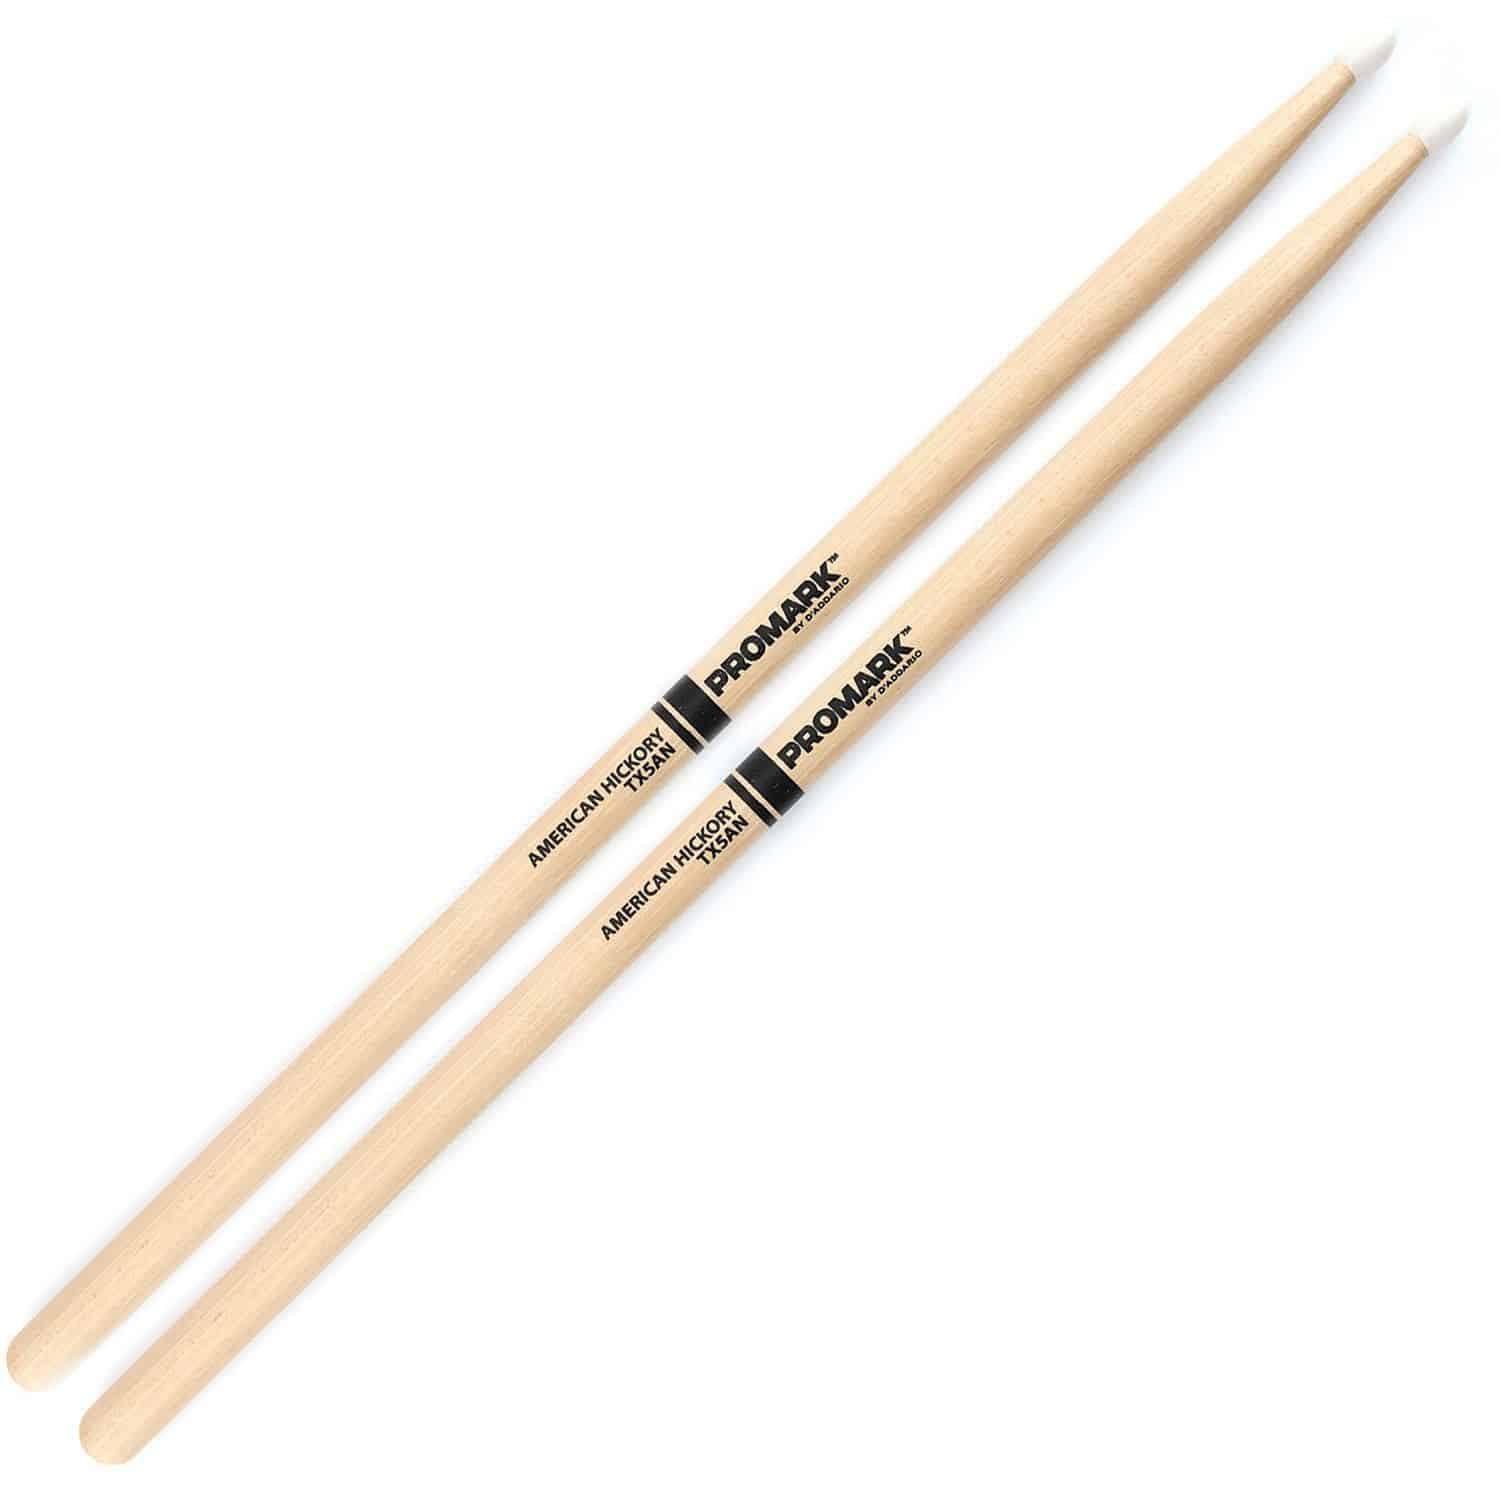 Promark - 5An Nylon Tip Drumsticks American Hickory - Drums & Percussion - Sticks & Mallets by Promark at Muso's Stuff